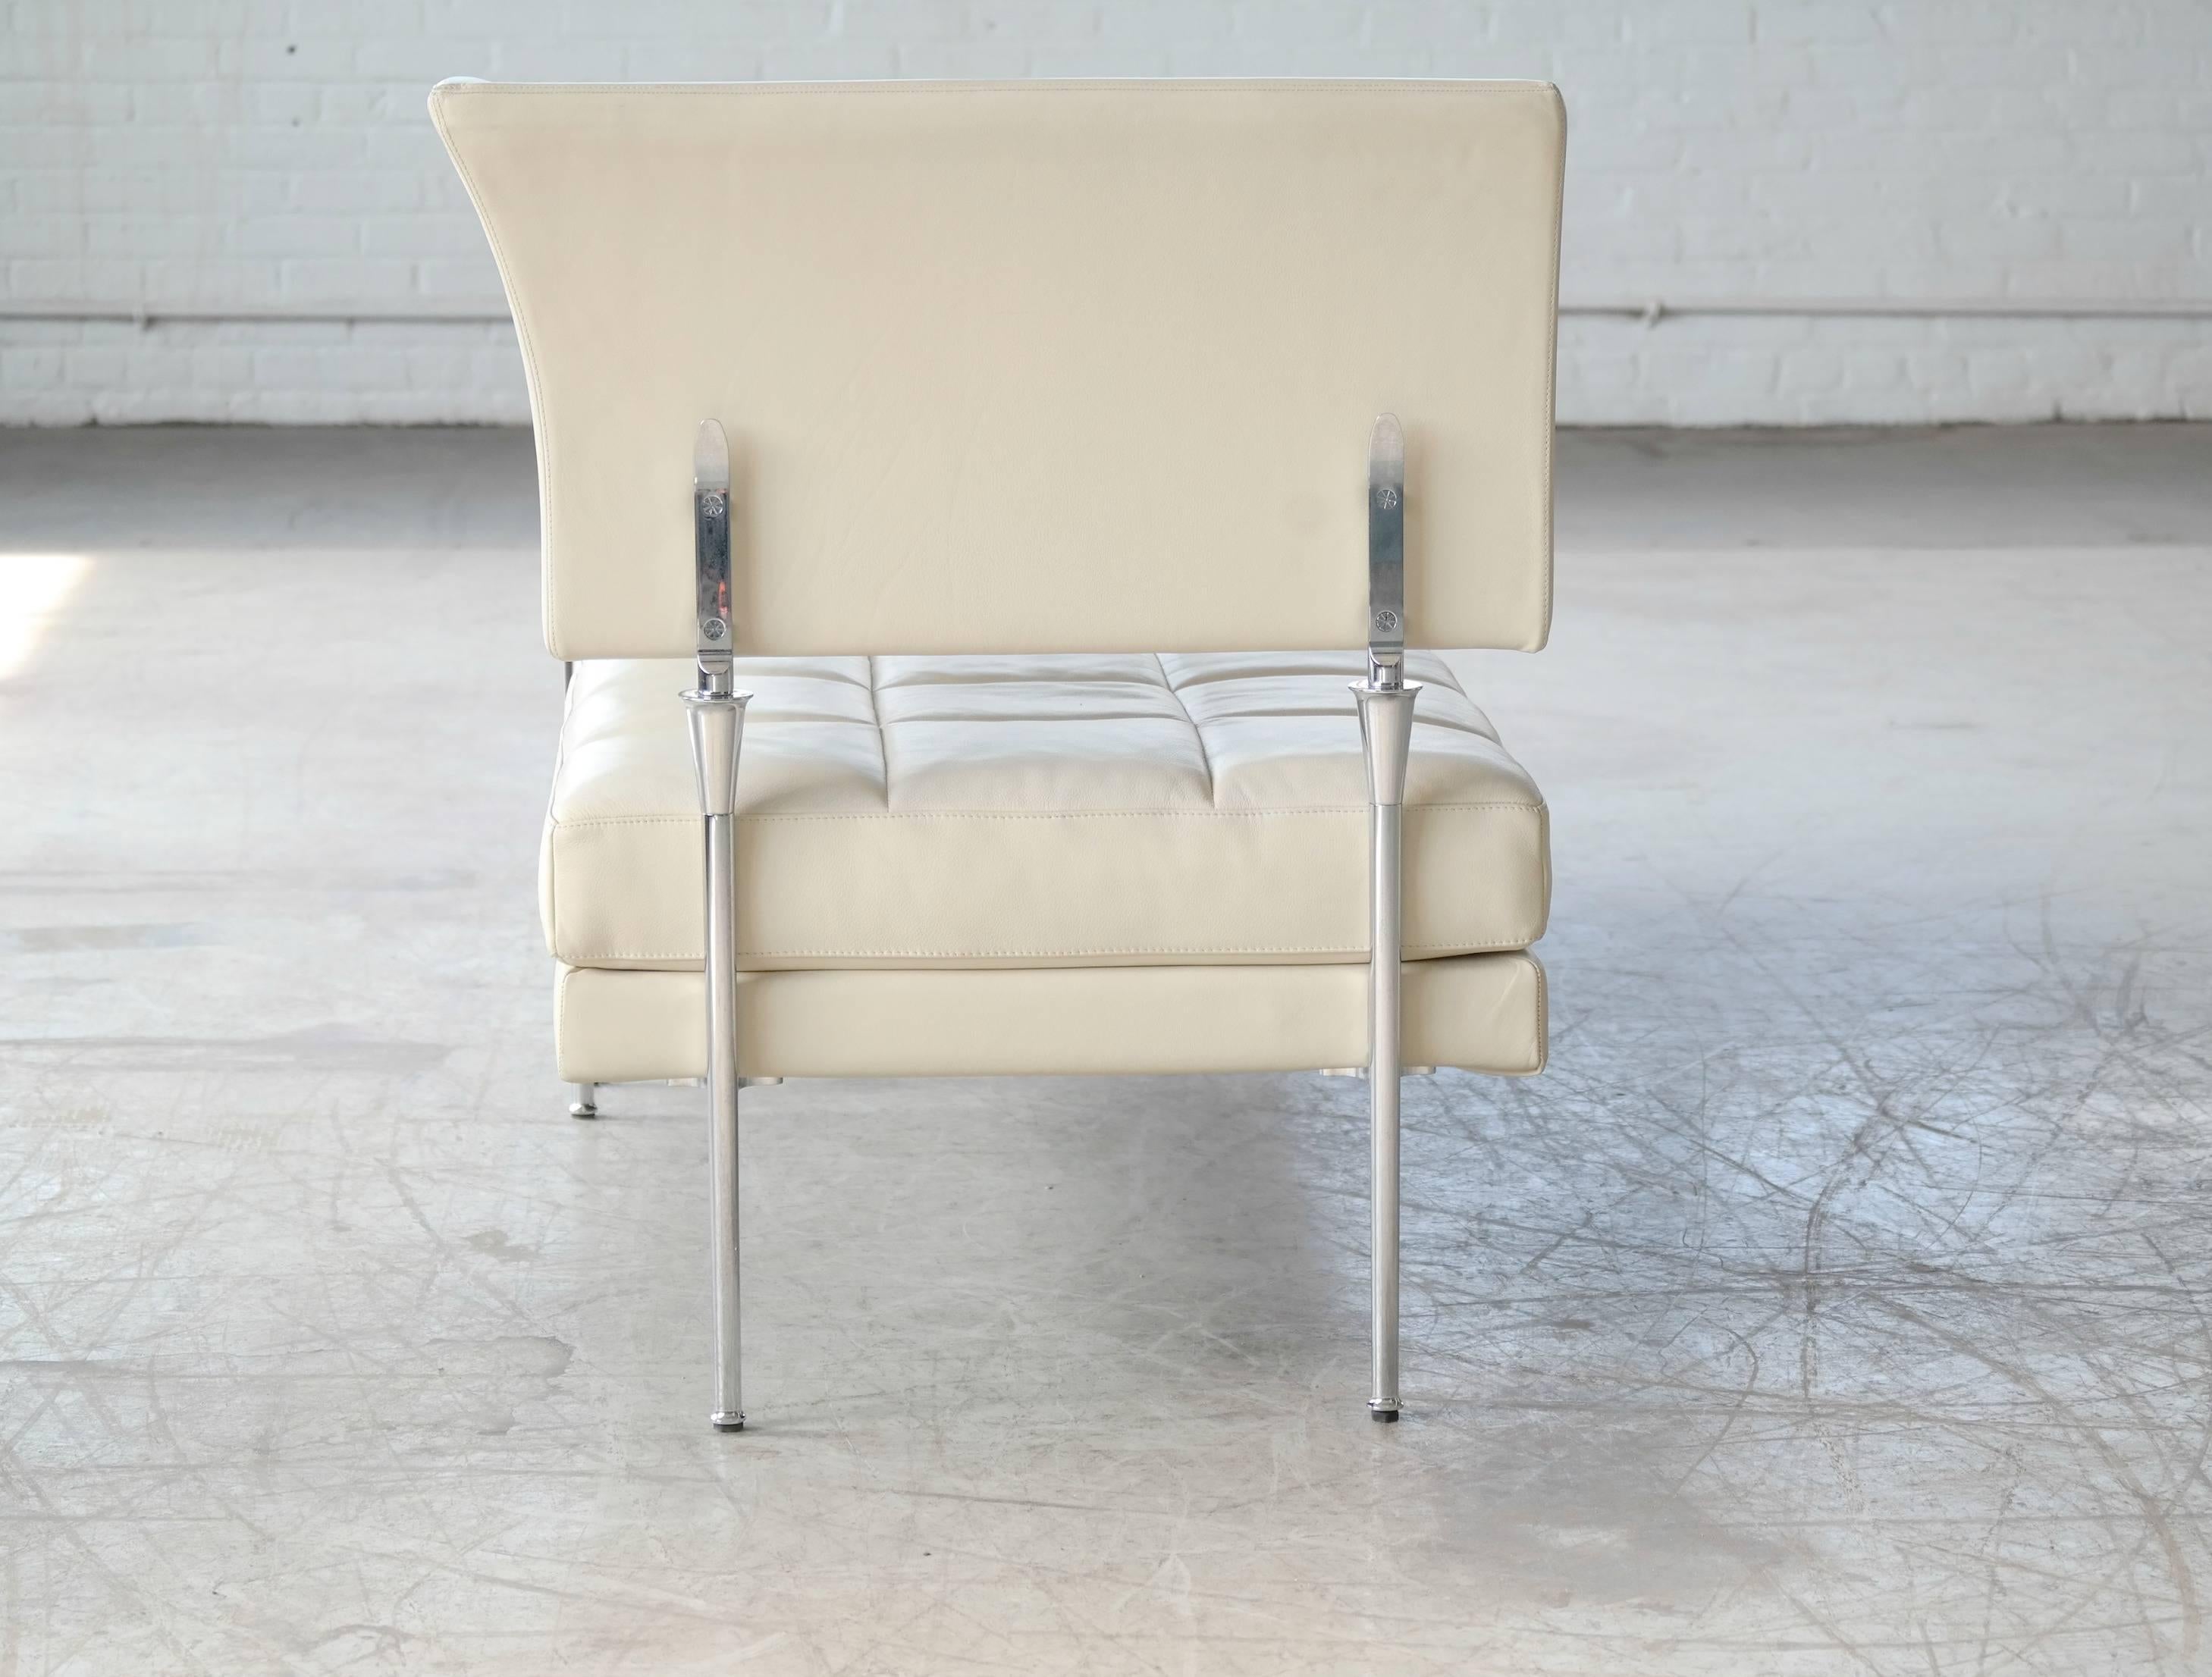 Chrome White Leather Model Hydra Chaise Longue by Luca Scacchetti for Poltrona Frau